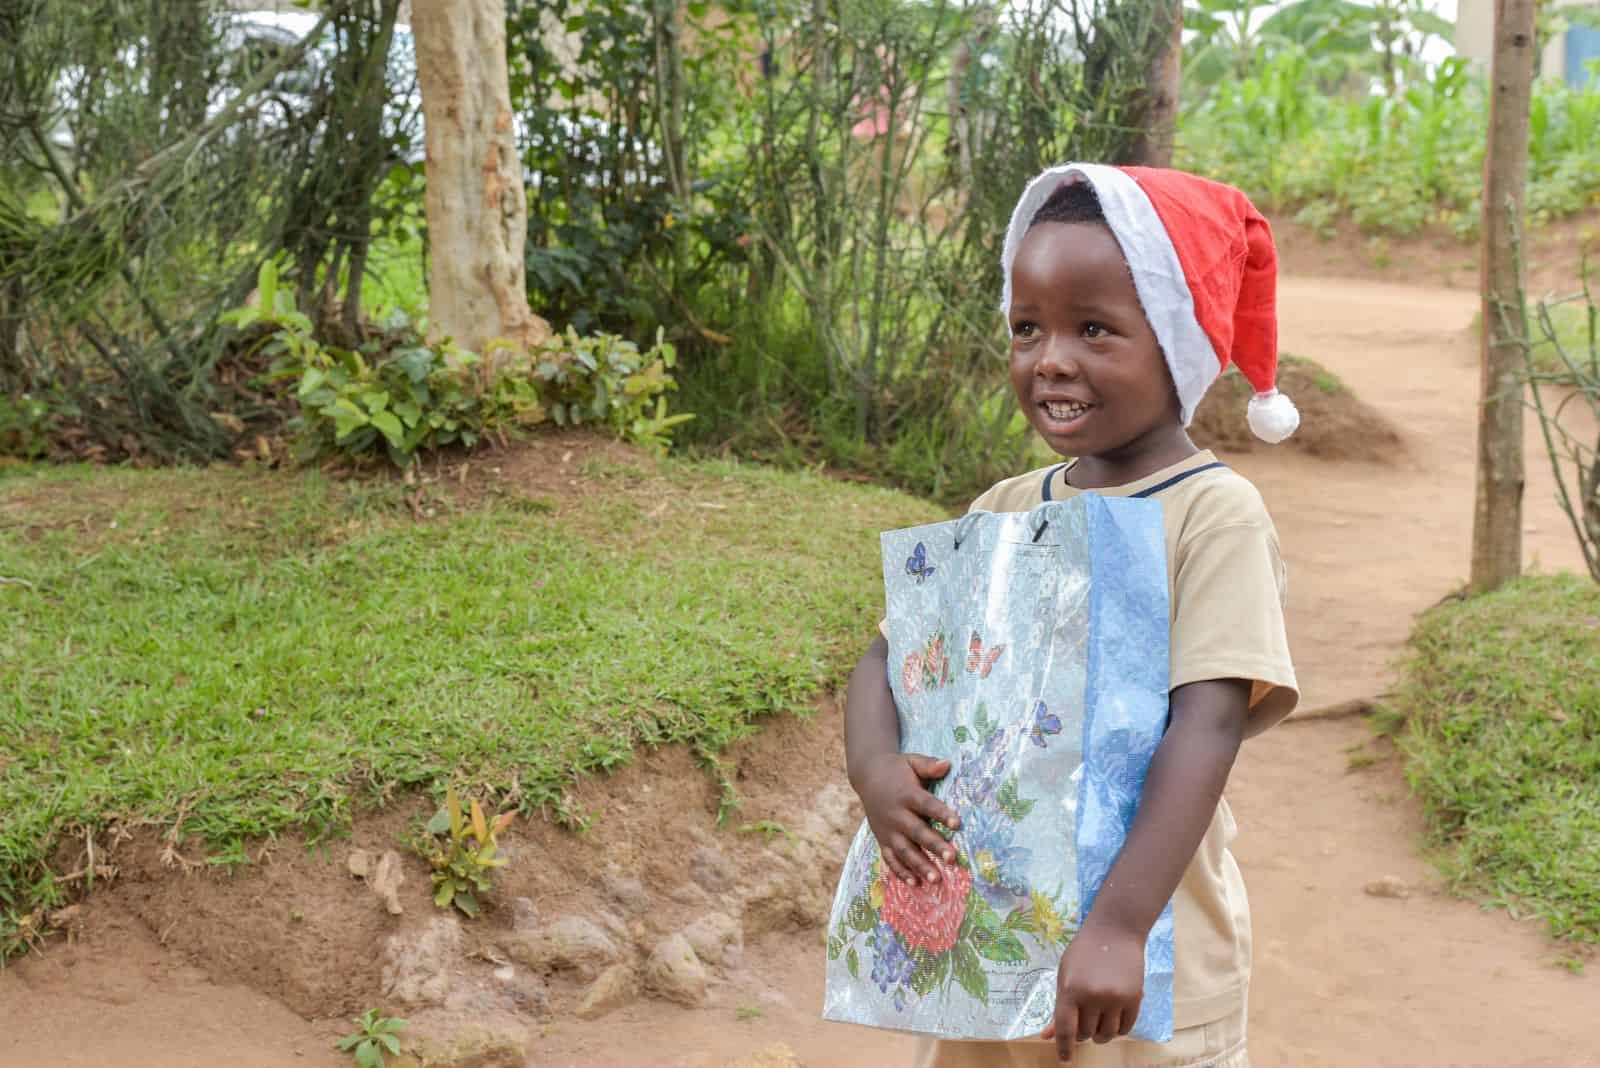 A boy in a tan shirt and Santa cap holds a gift bag, smiling and standing on a dirt path.